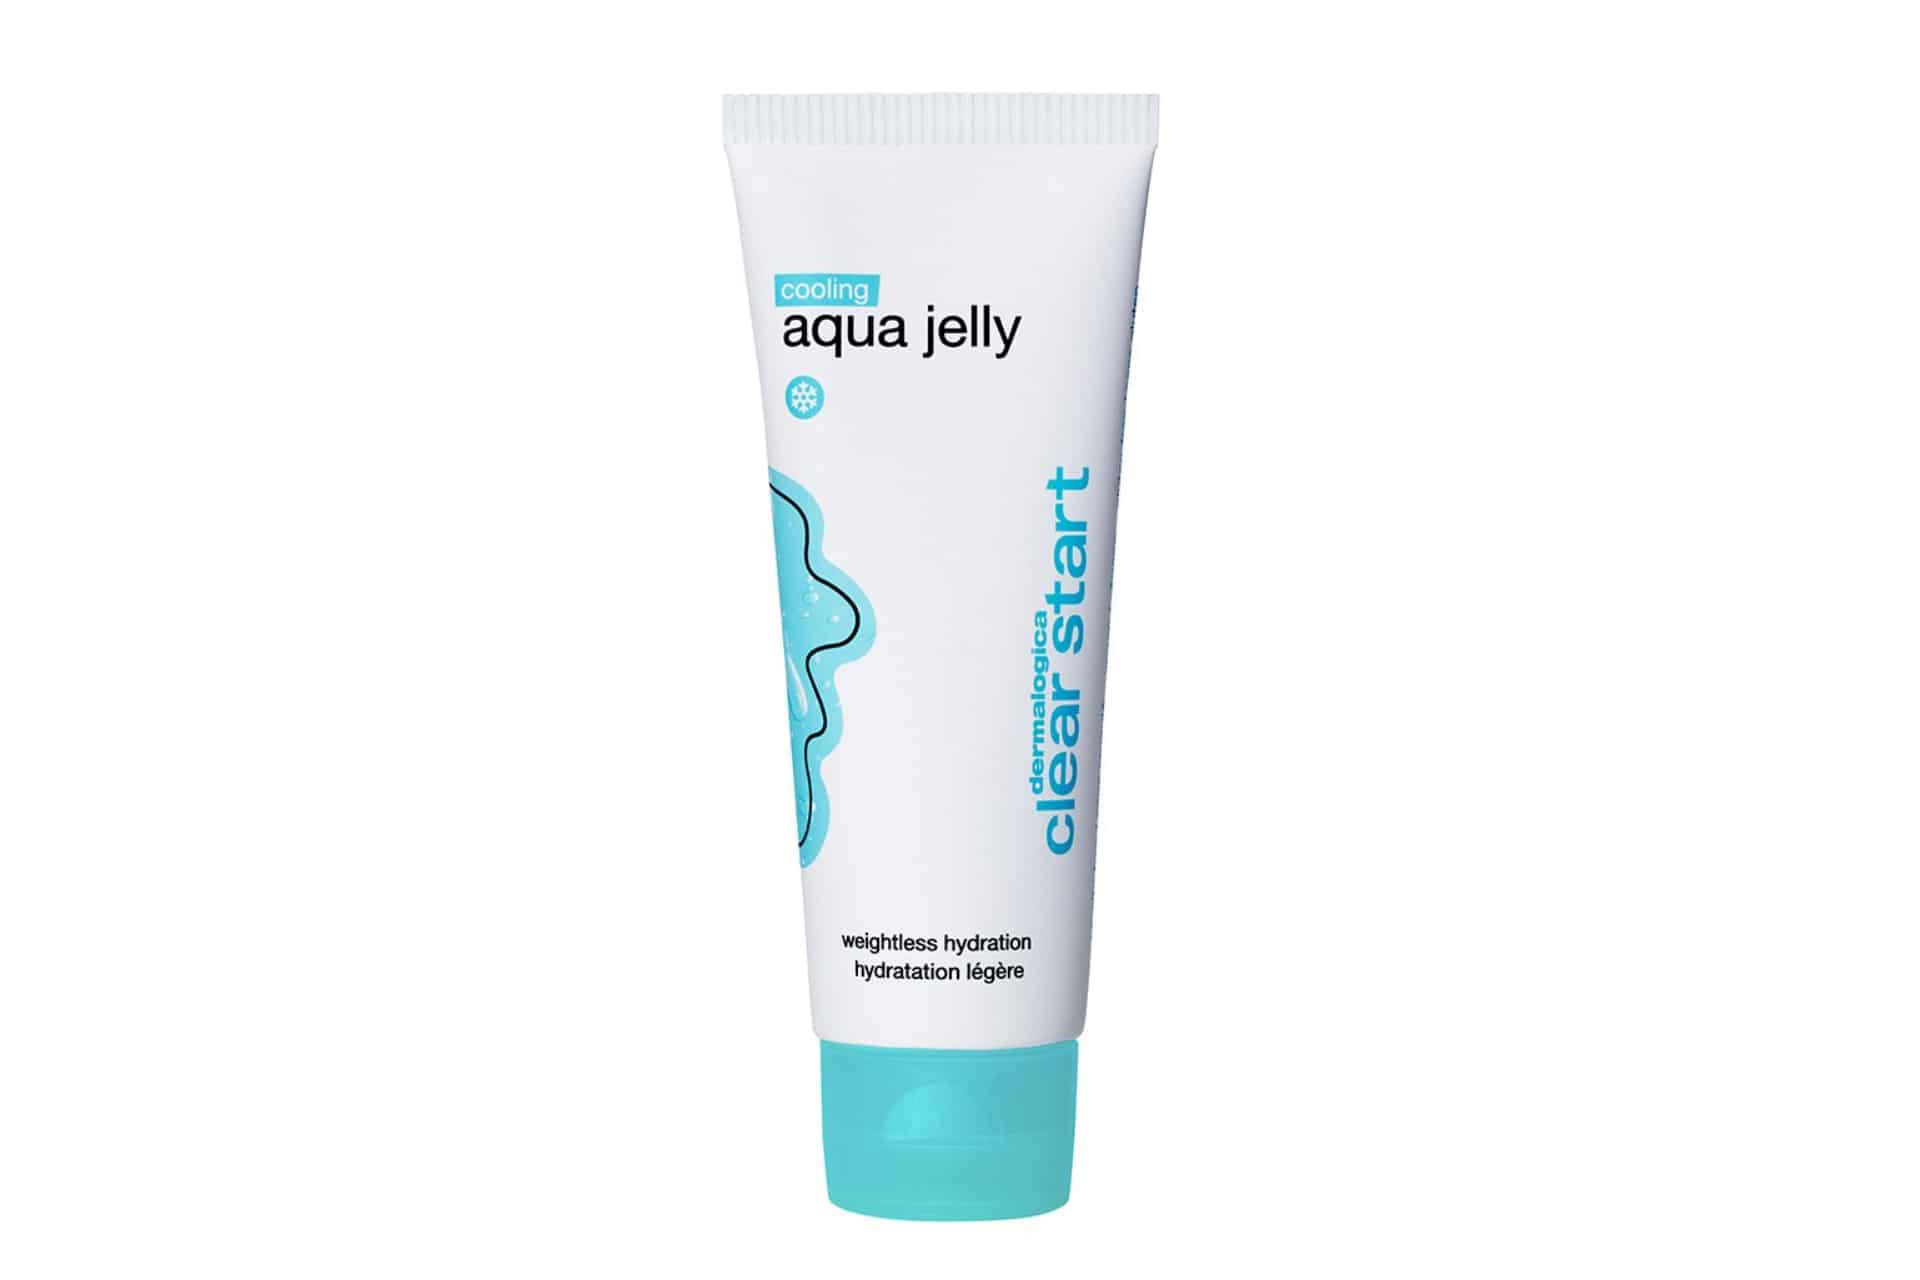 bottle of cooling aqua jelly in teal and white packaging